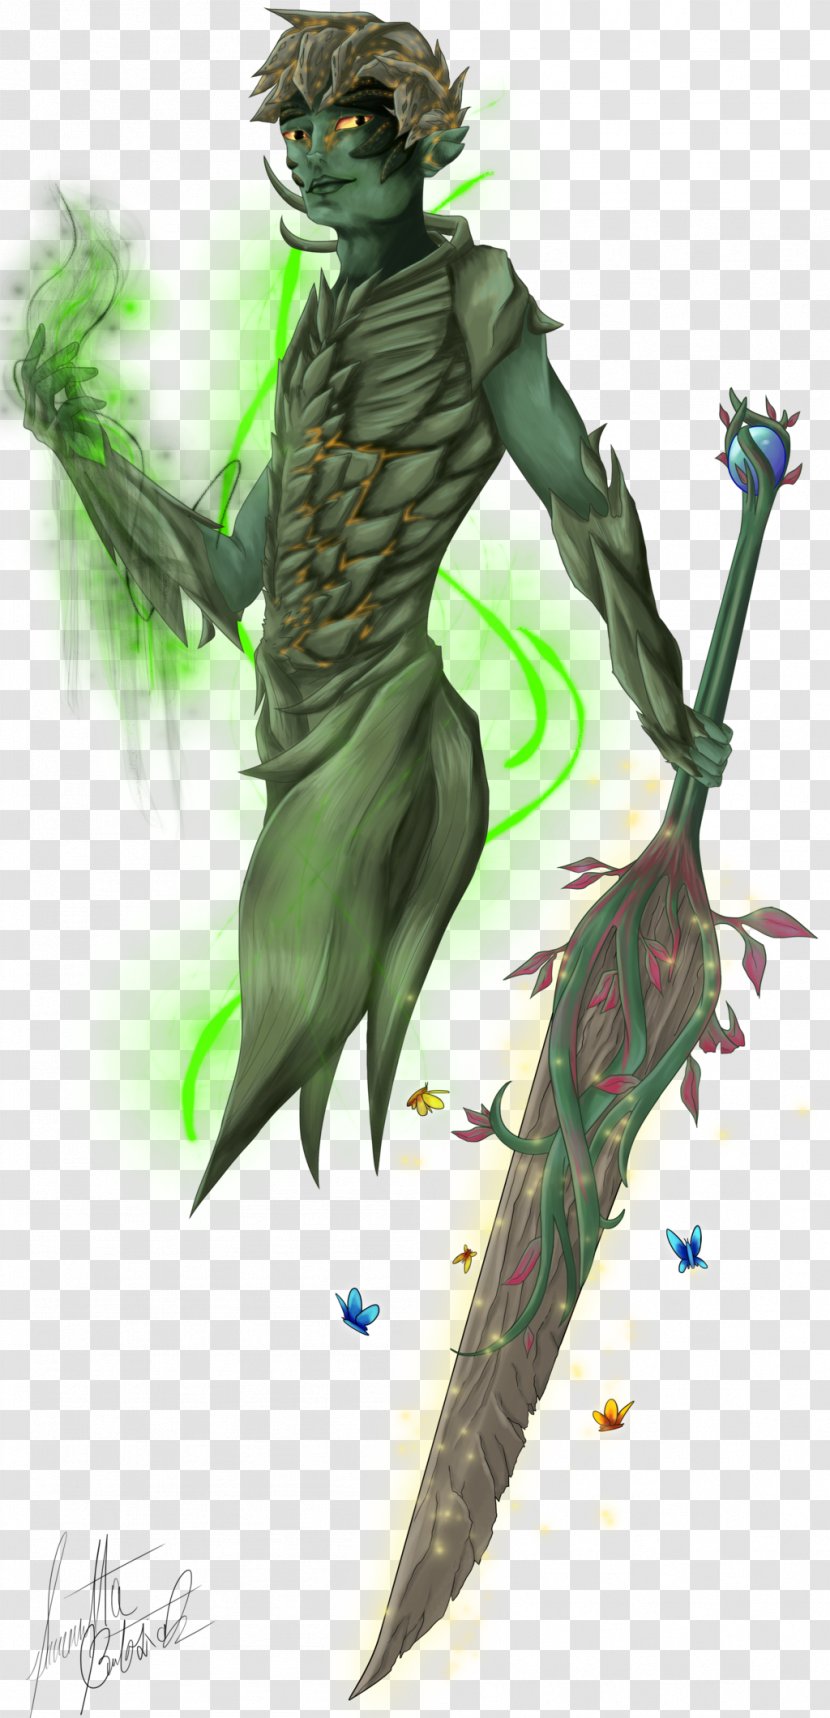 Costume Design Weapon Tree - Mythical Creature Transparent PNG